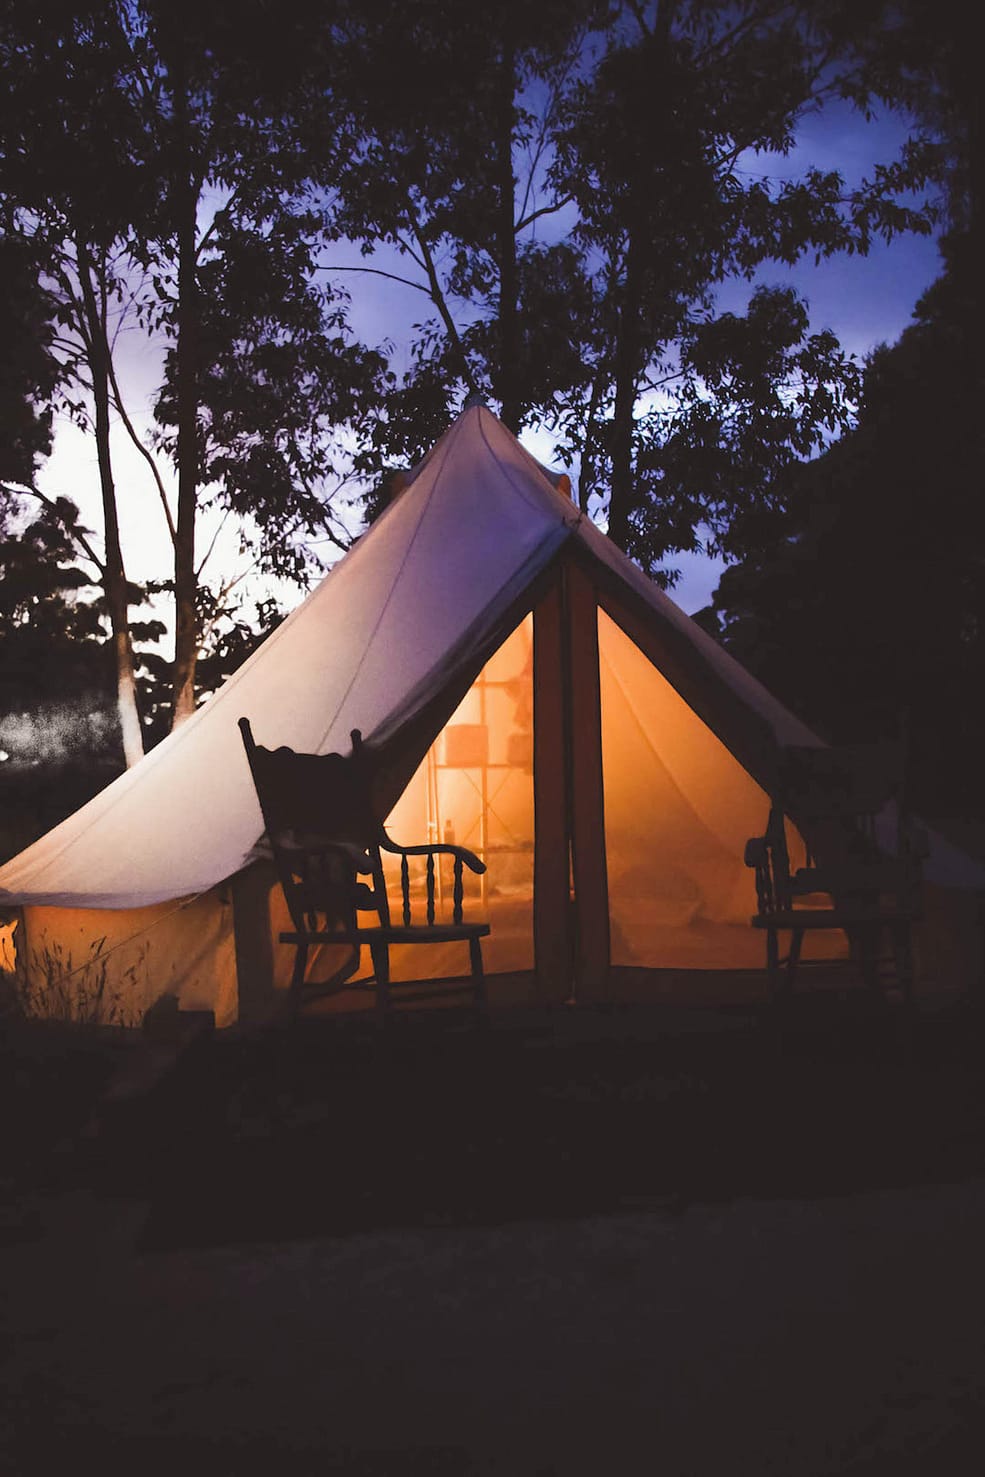 How to travel sustainable-Glamping is the hit